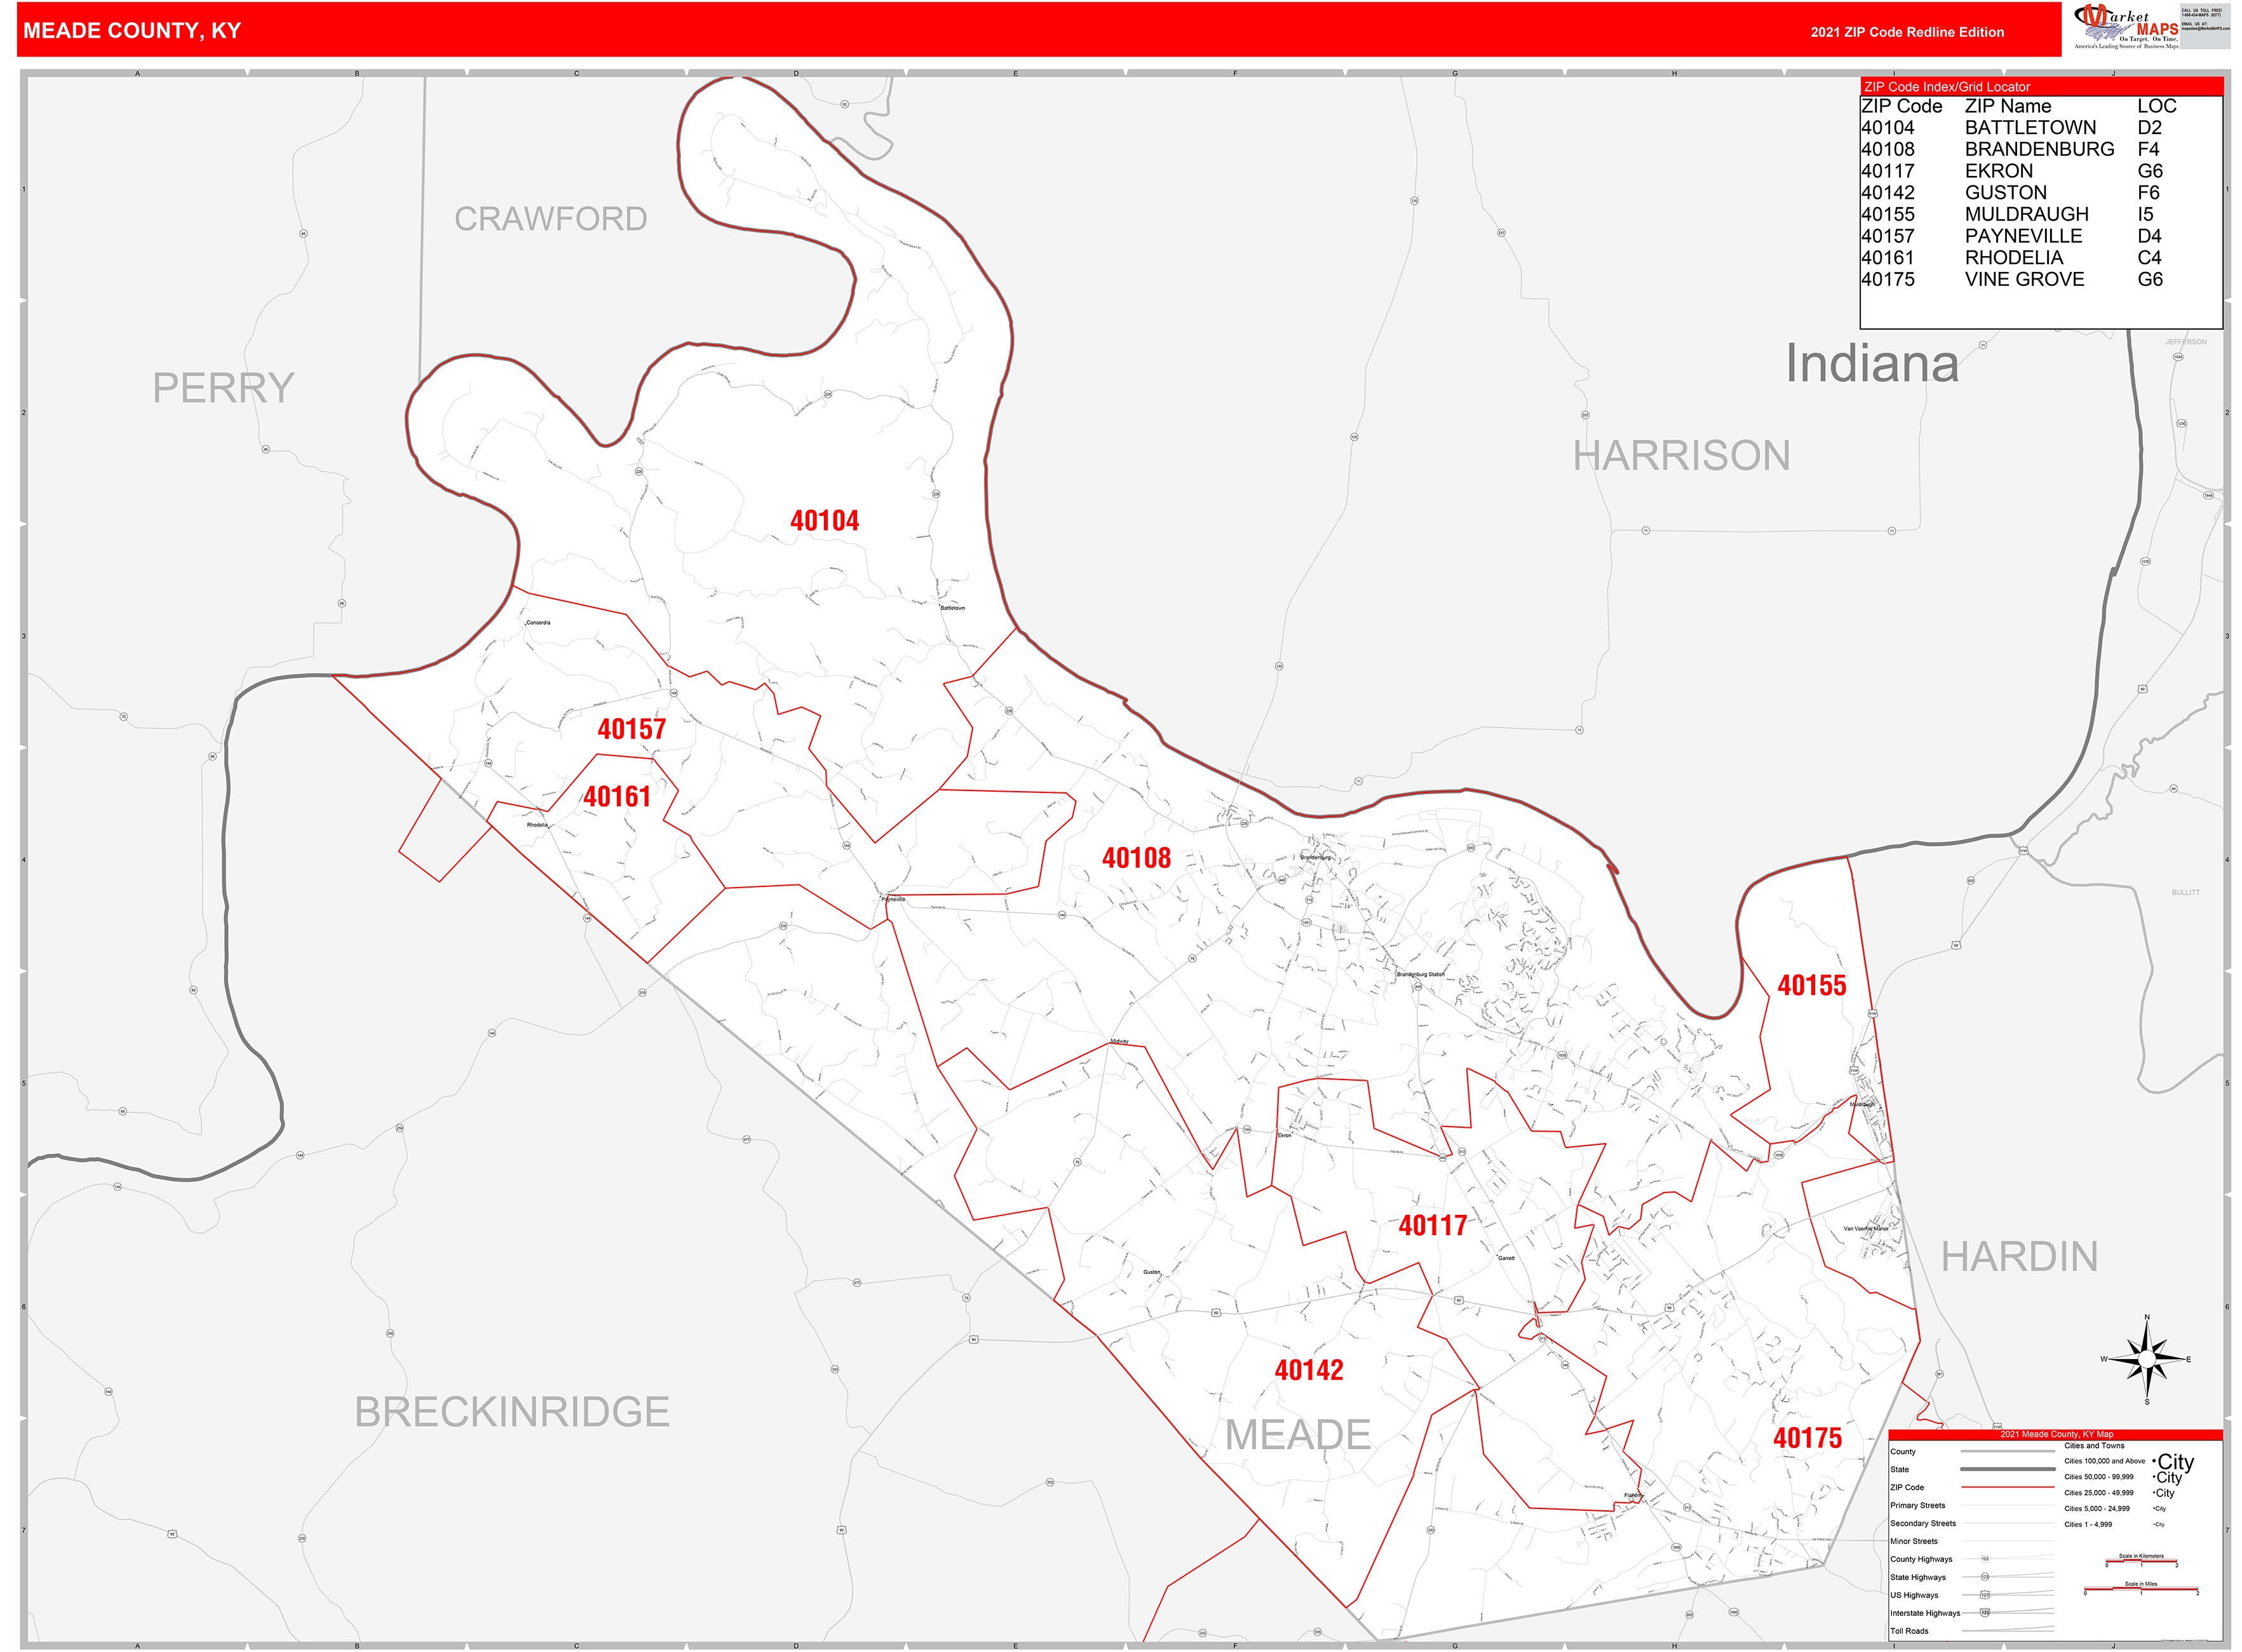 Meade County, KY Zip Code Wall Map Red Line Style by MarketMAPS MapSales